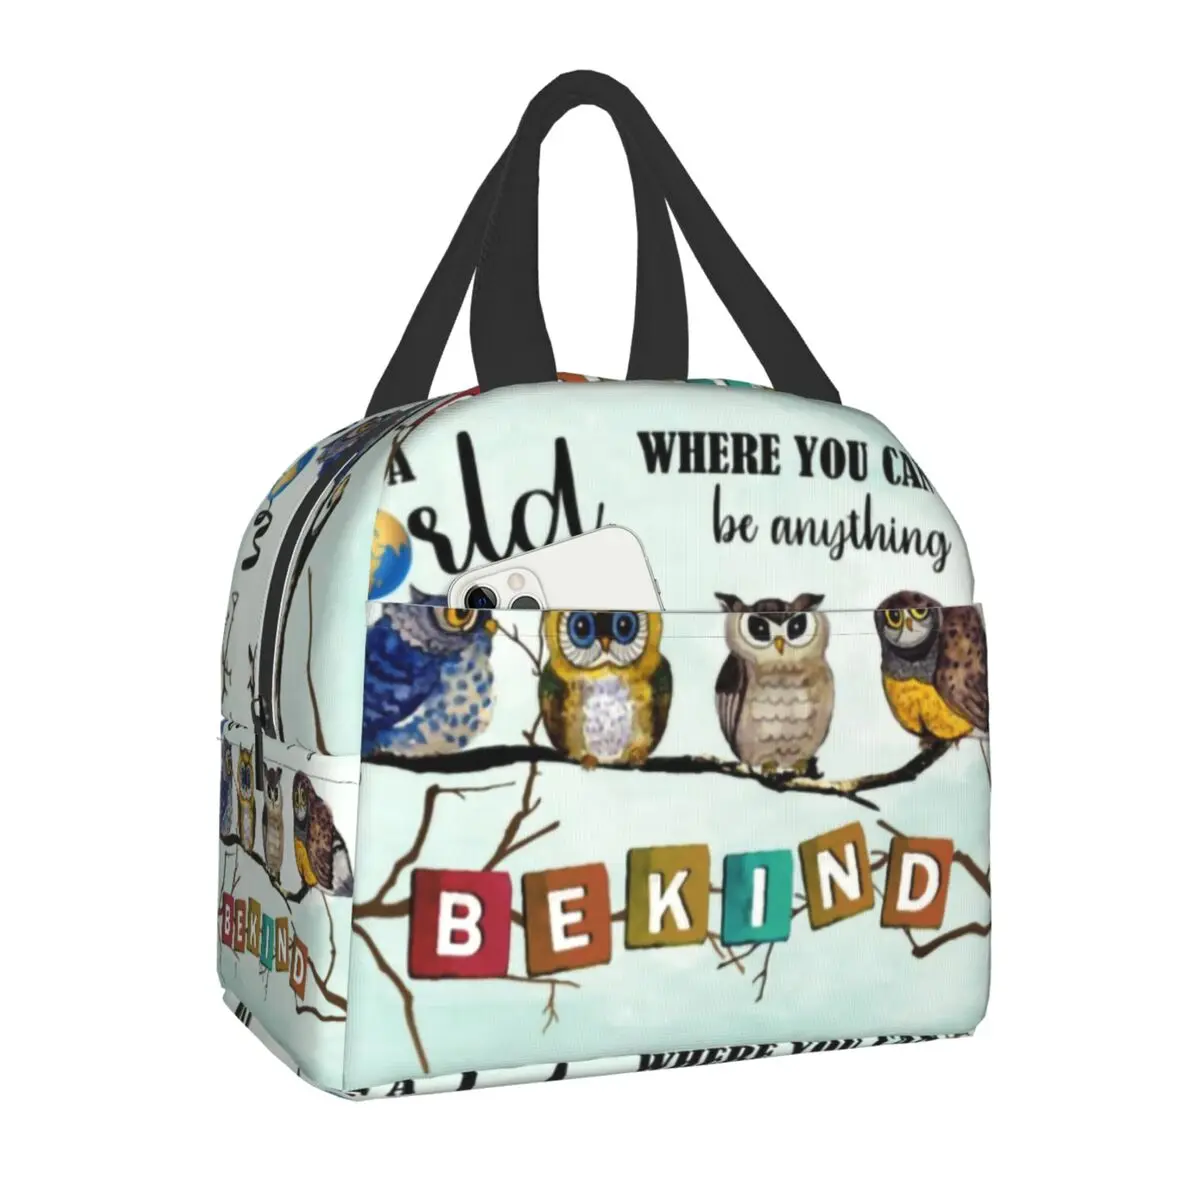 

Owls In A World Where You Can Be Anything Be Kind Insulated Lunch Bag Women Waterproof Wildlife Bird Cooler Thermal Bento Box